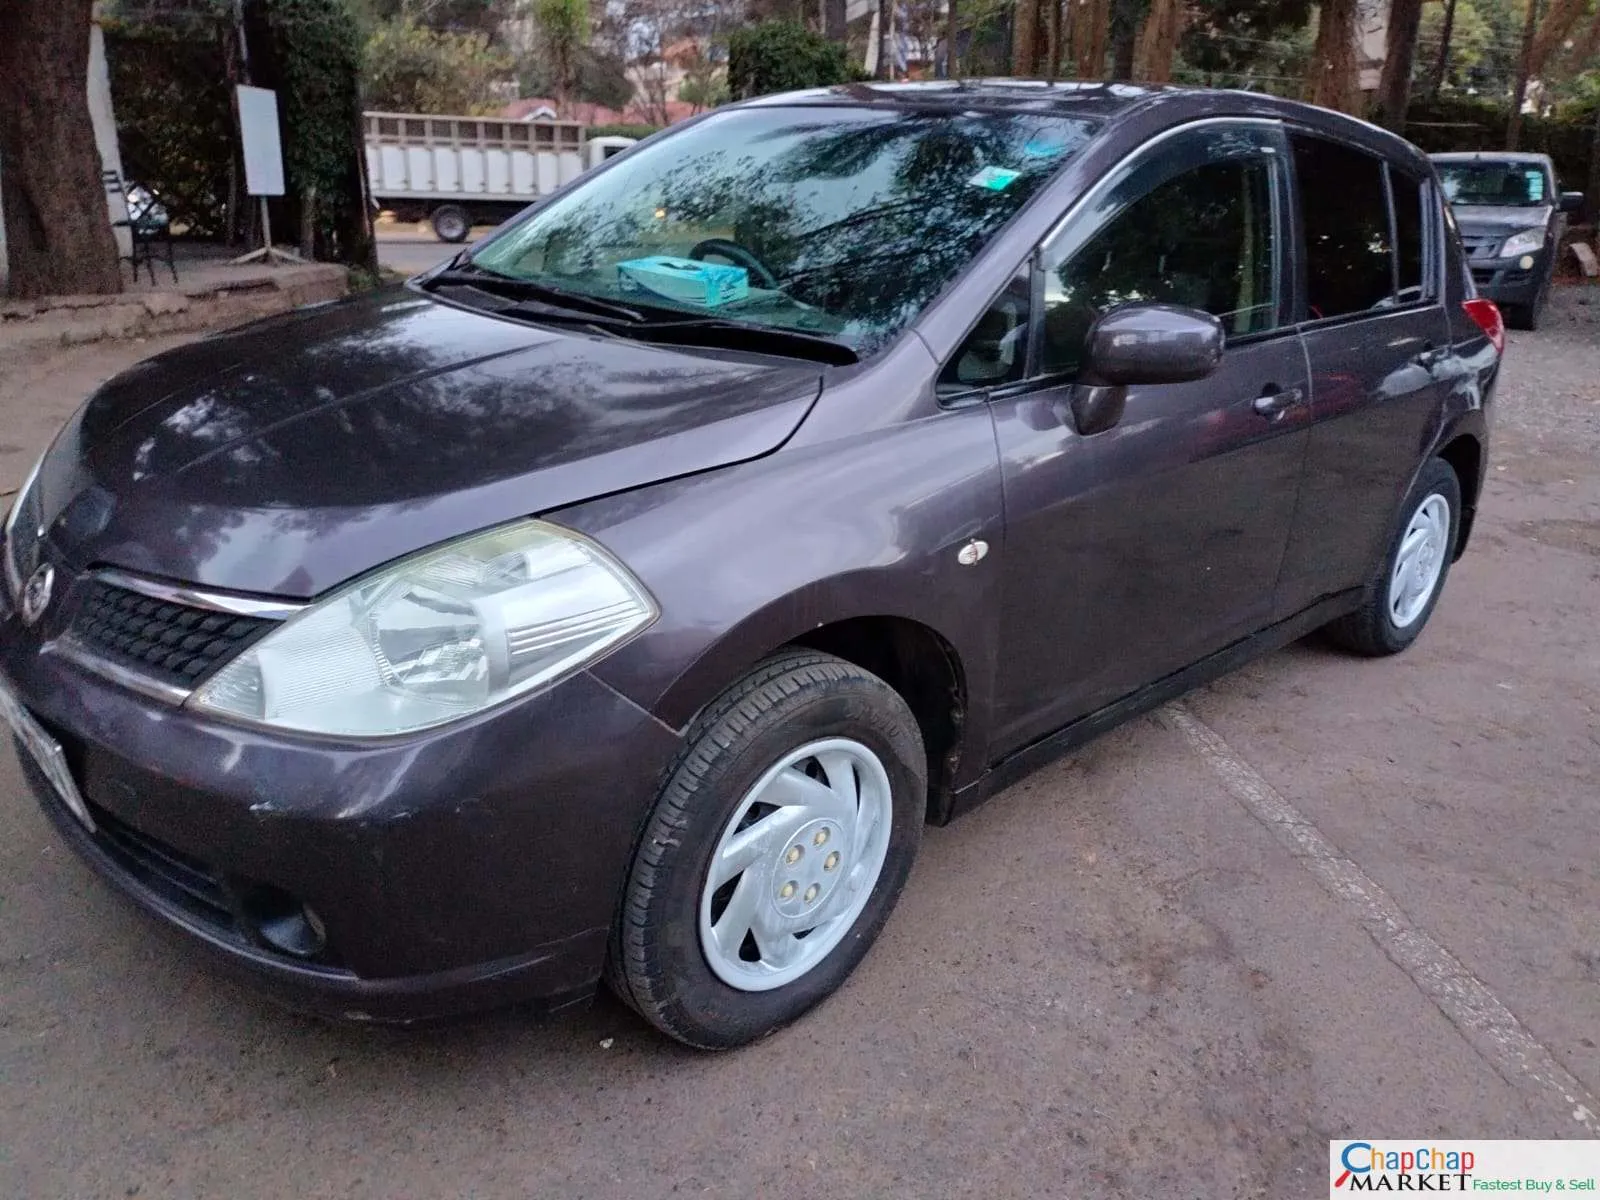 Cars Cars For Sale-Nissan Tiida kenya You ONLY Pay 30% Deposit Trade in Ok tiida for sale in kenya hire purchase installments EXCLUSIVE 7